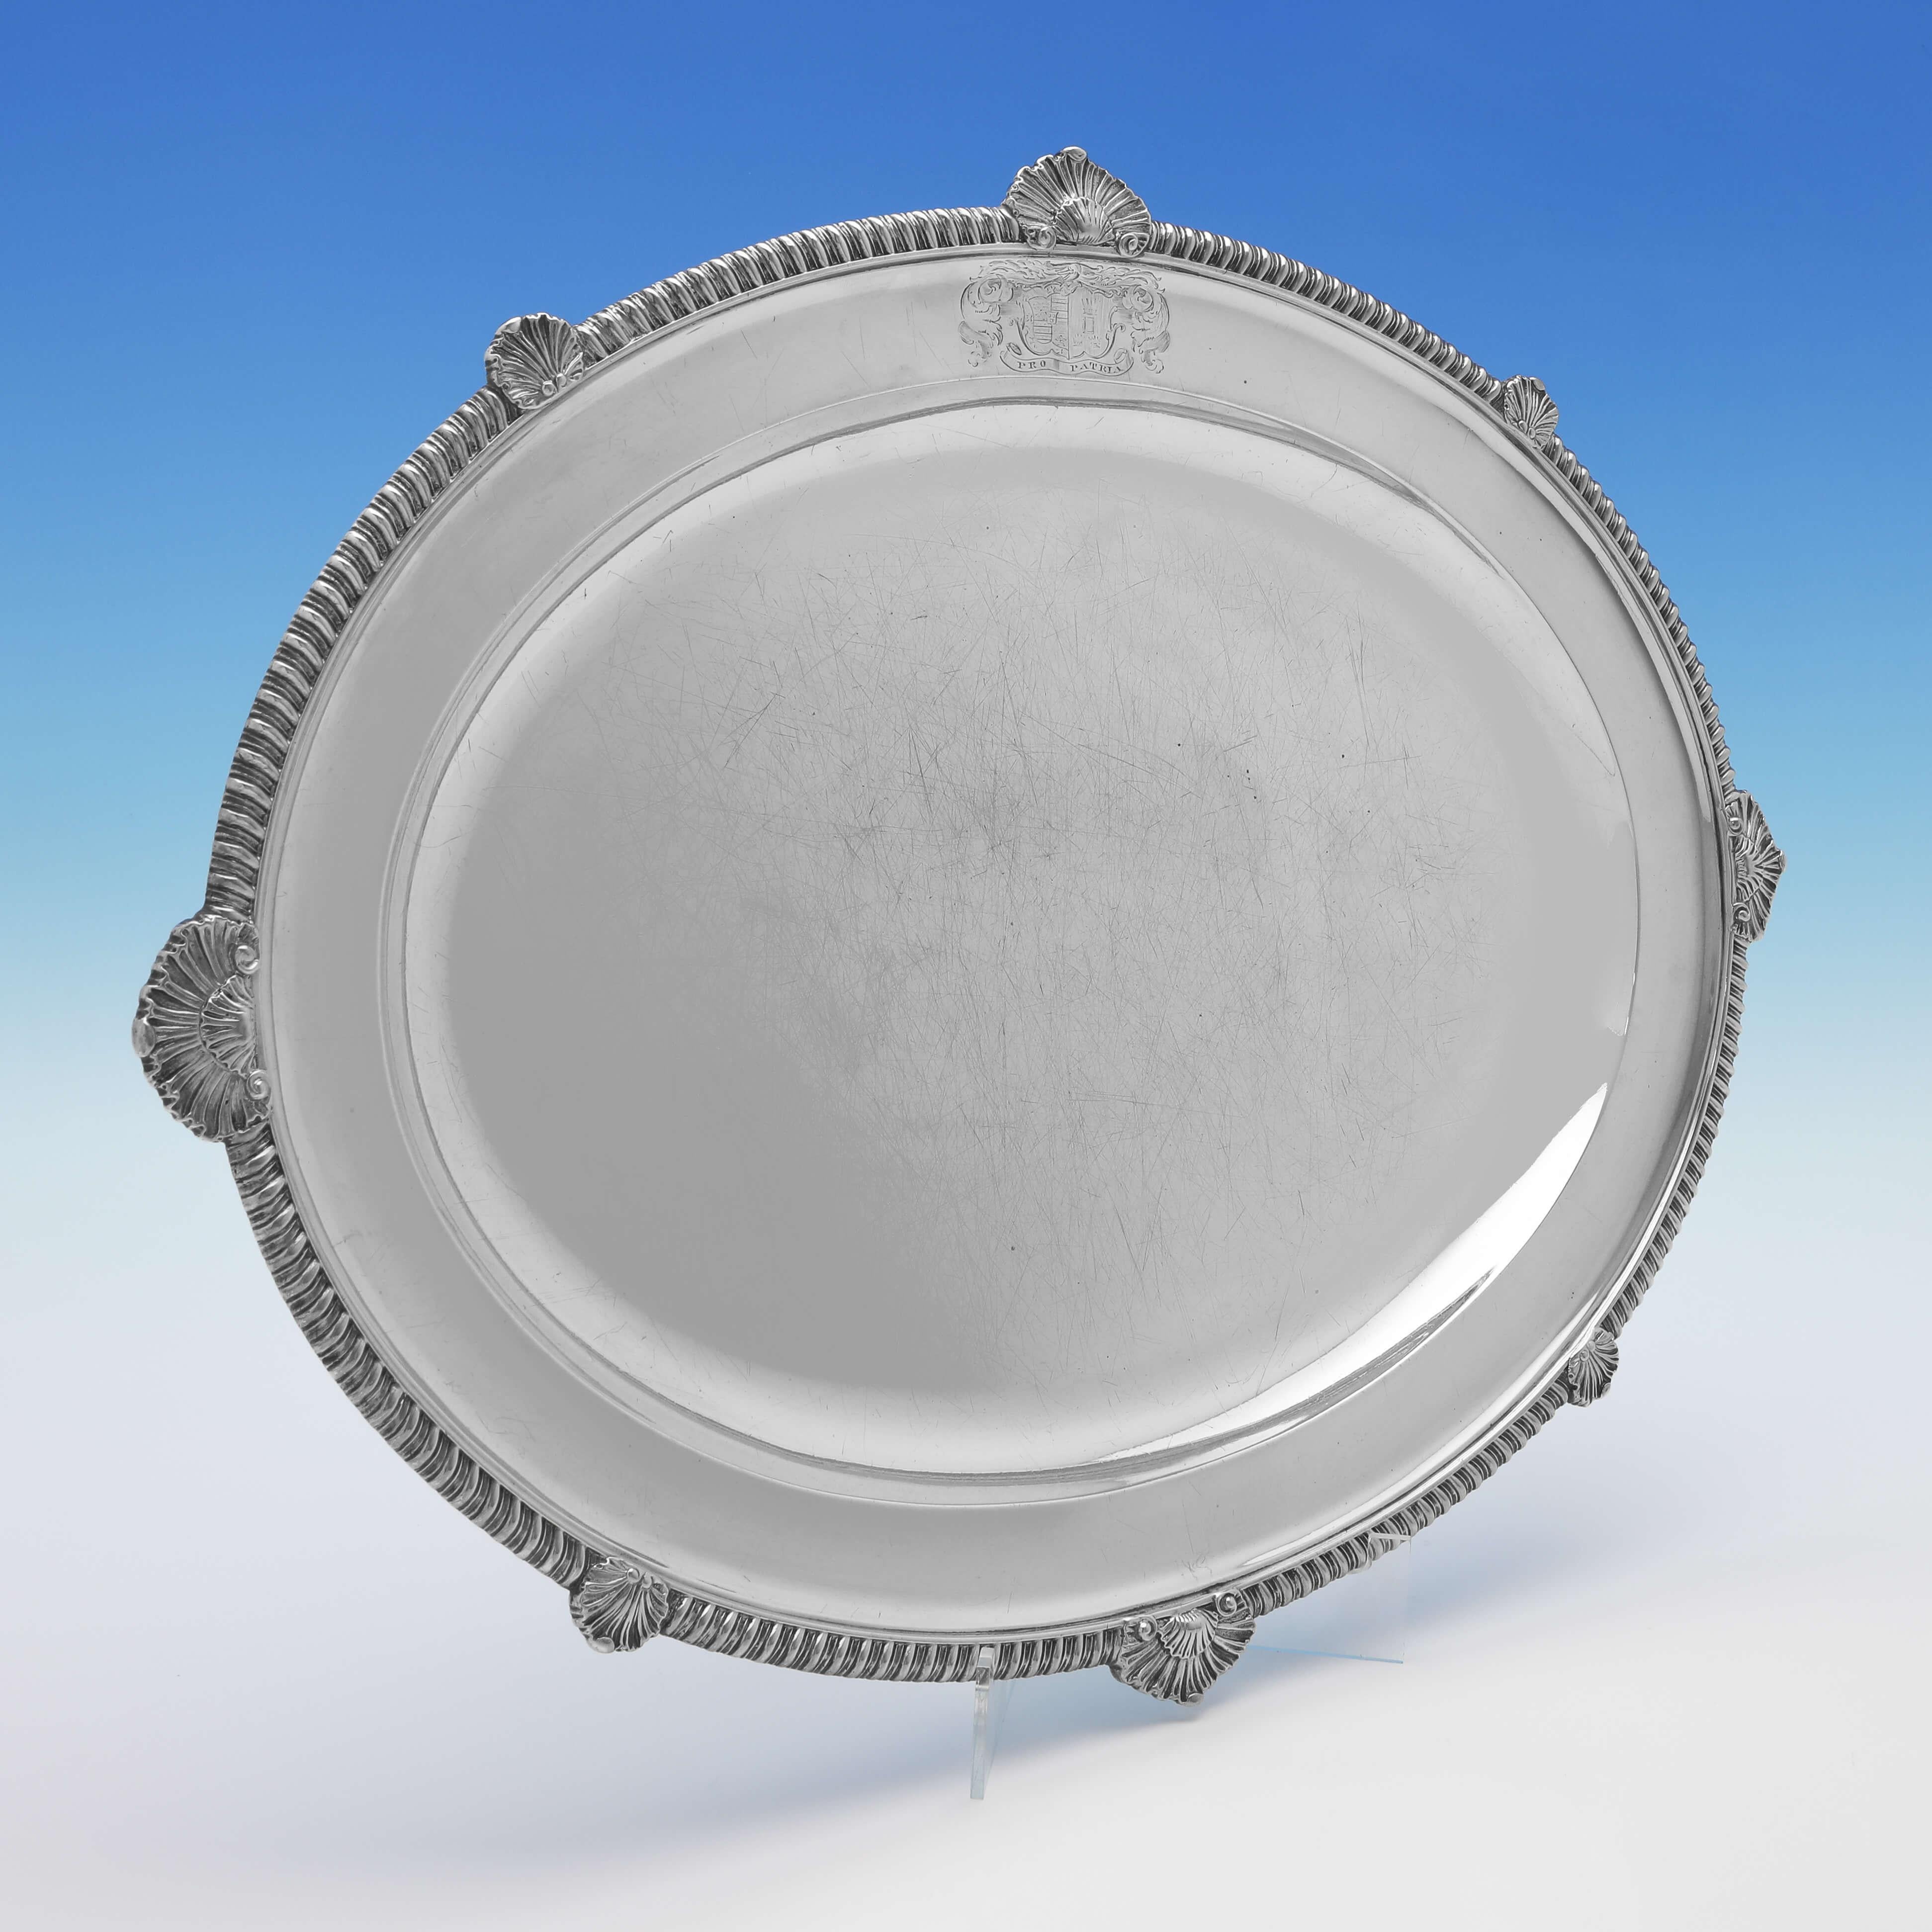 Hallmarked in London in 1822 by William Eley II, this very handsome pair of Antique, Sterling Silver Meat Dishes, are in the Regency taste, featuring shell and gadroon borders and an engraved coast of arms to each.

Each meat dish measures